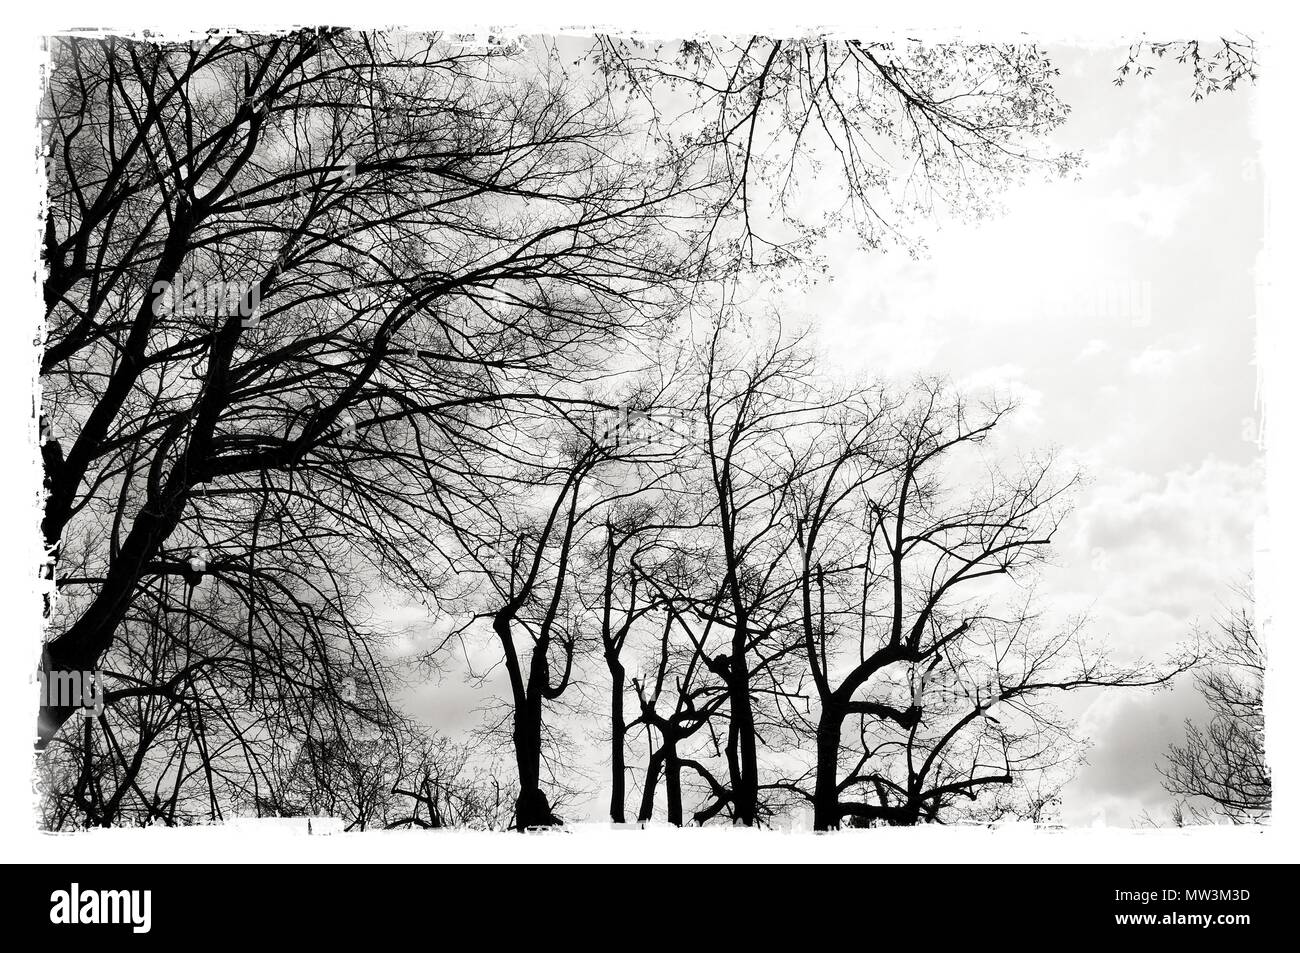 Black And White Bare Trees With Worn Borders Nature